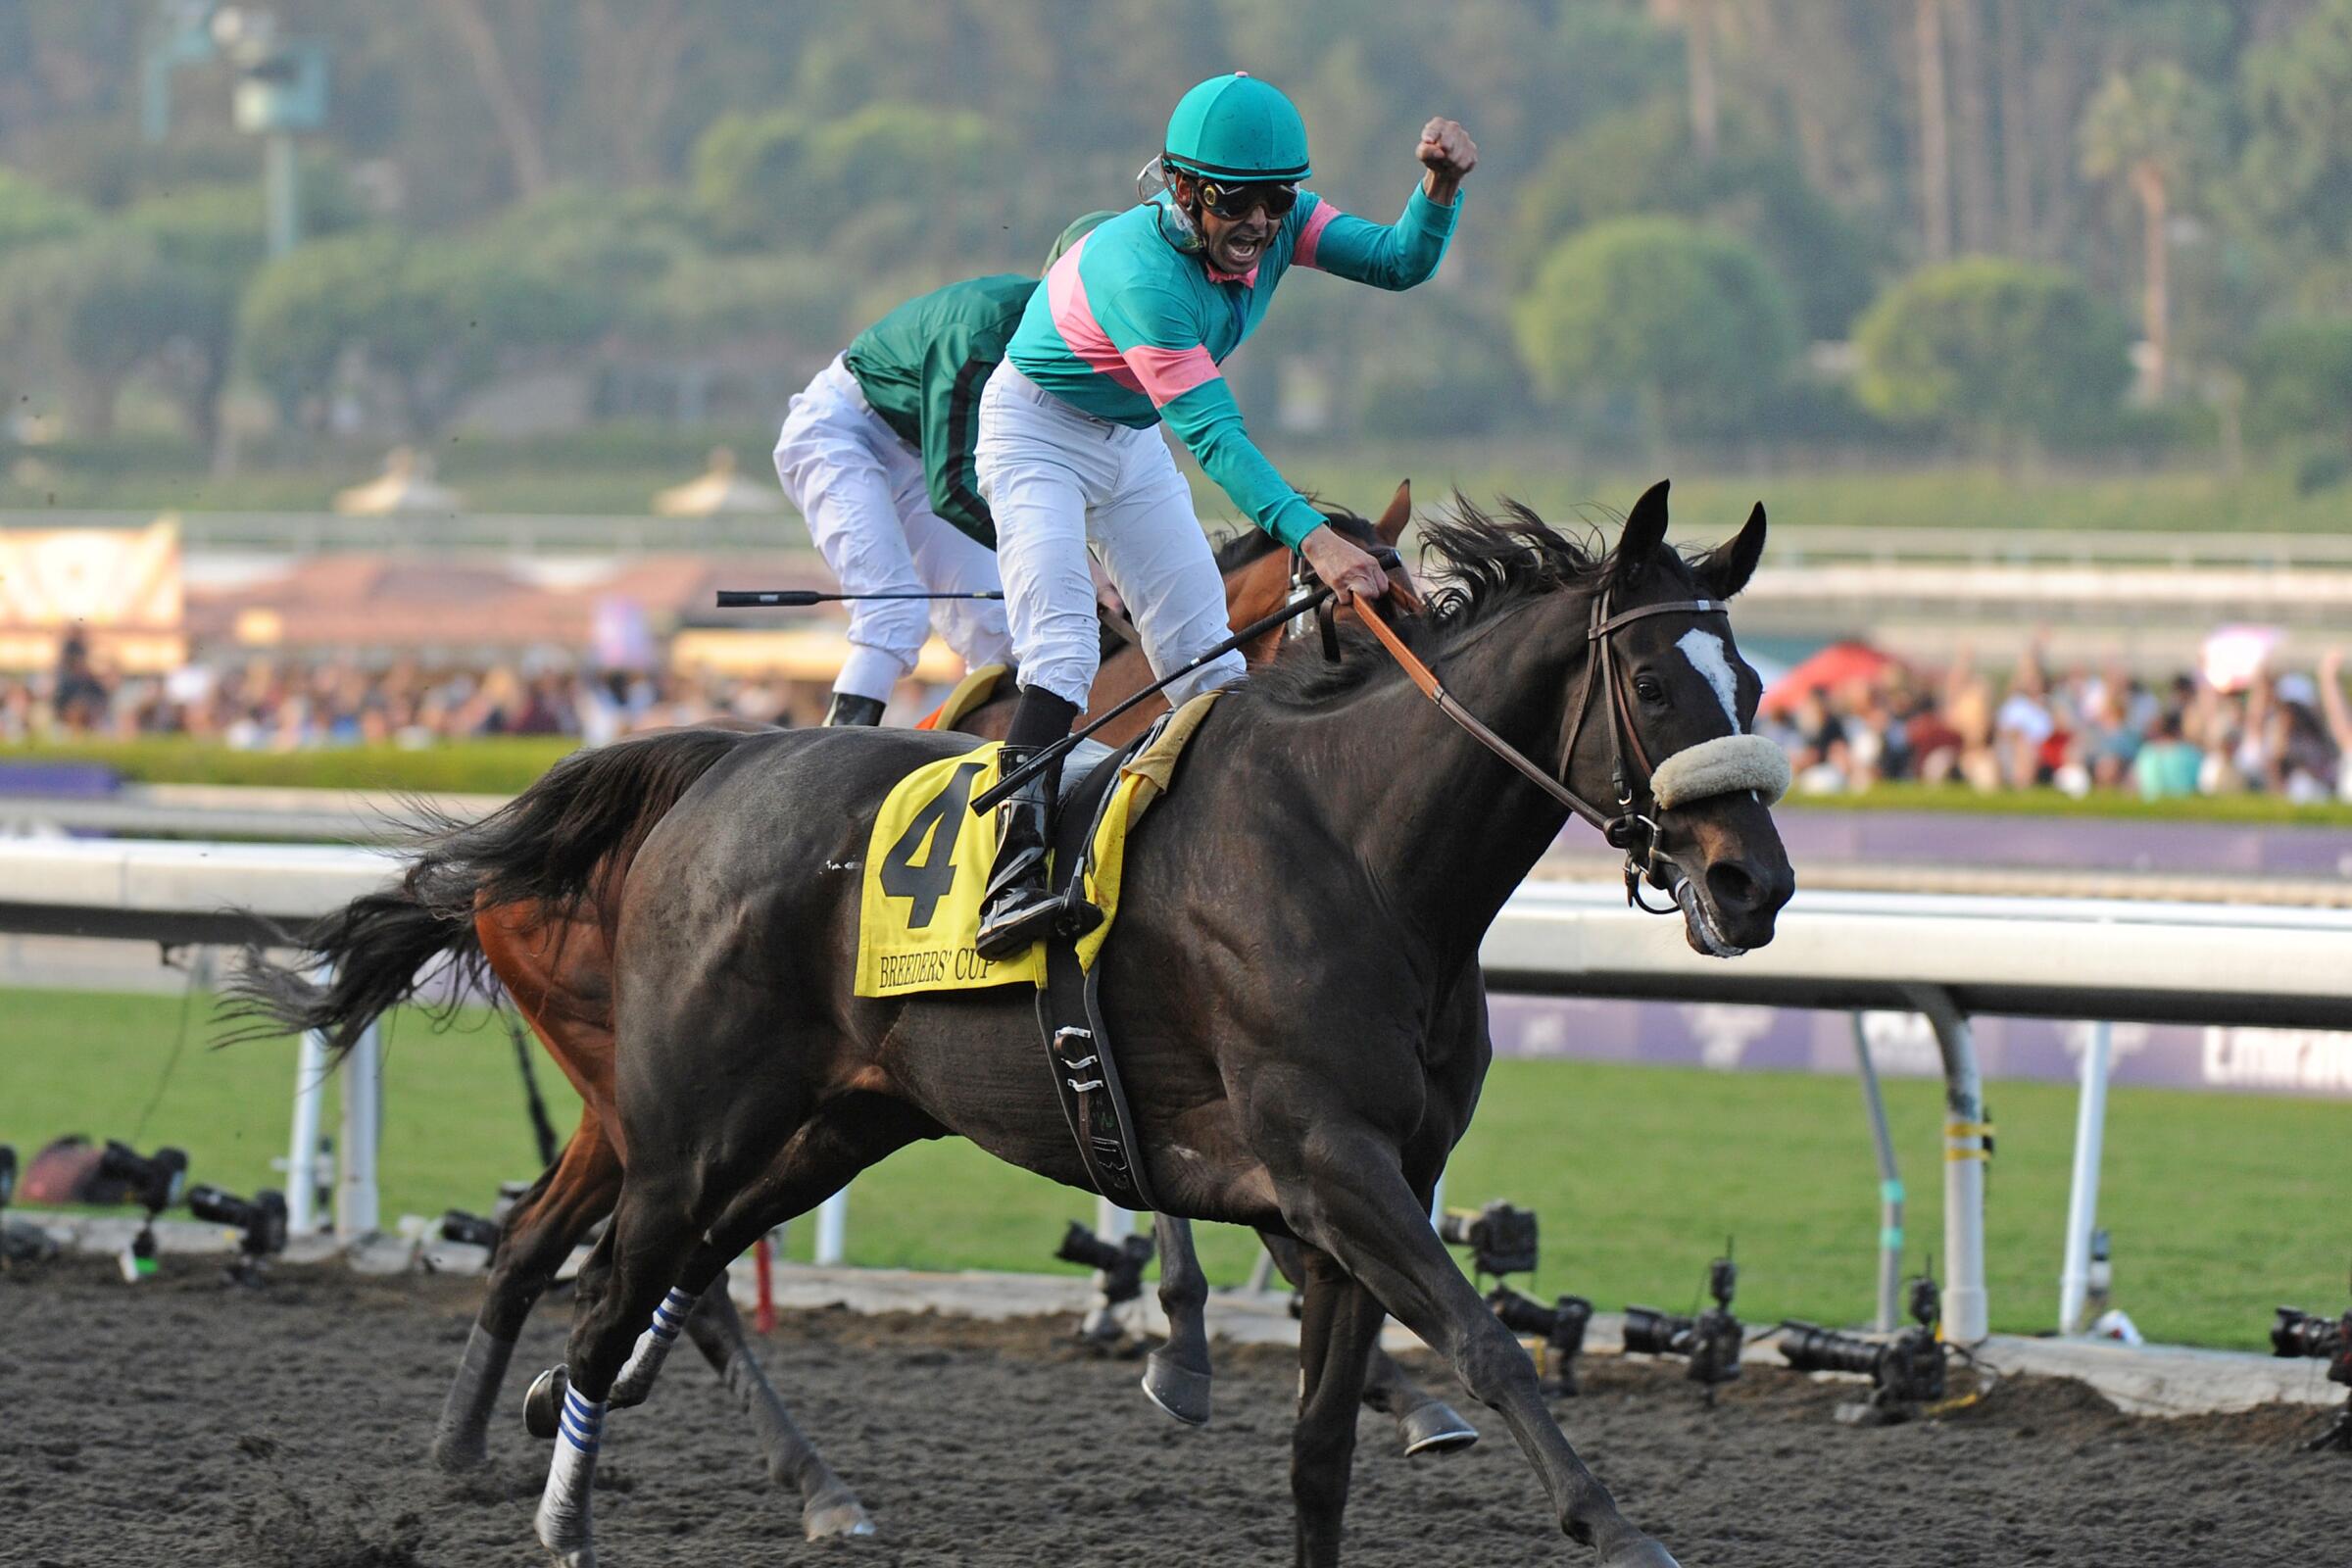 Jockey Mike Smith celebrates after riding Zenyatta to victory in the $5-million Breeders' Cup Classic at Santa Anita Park.